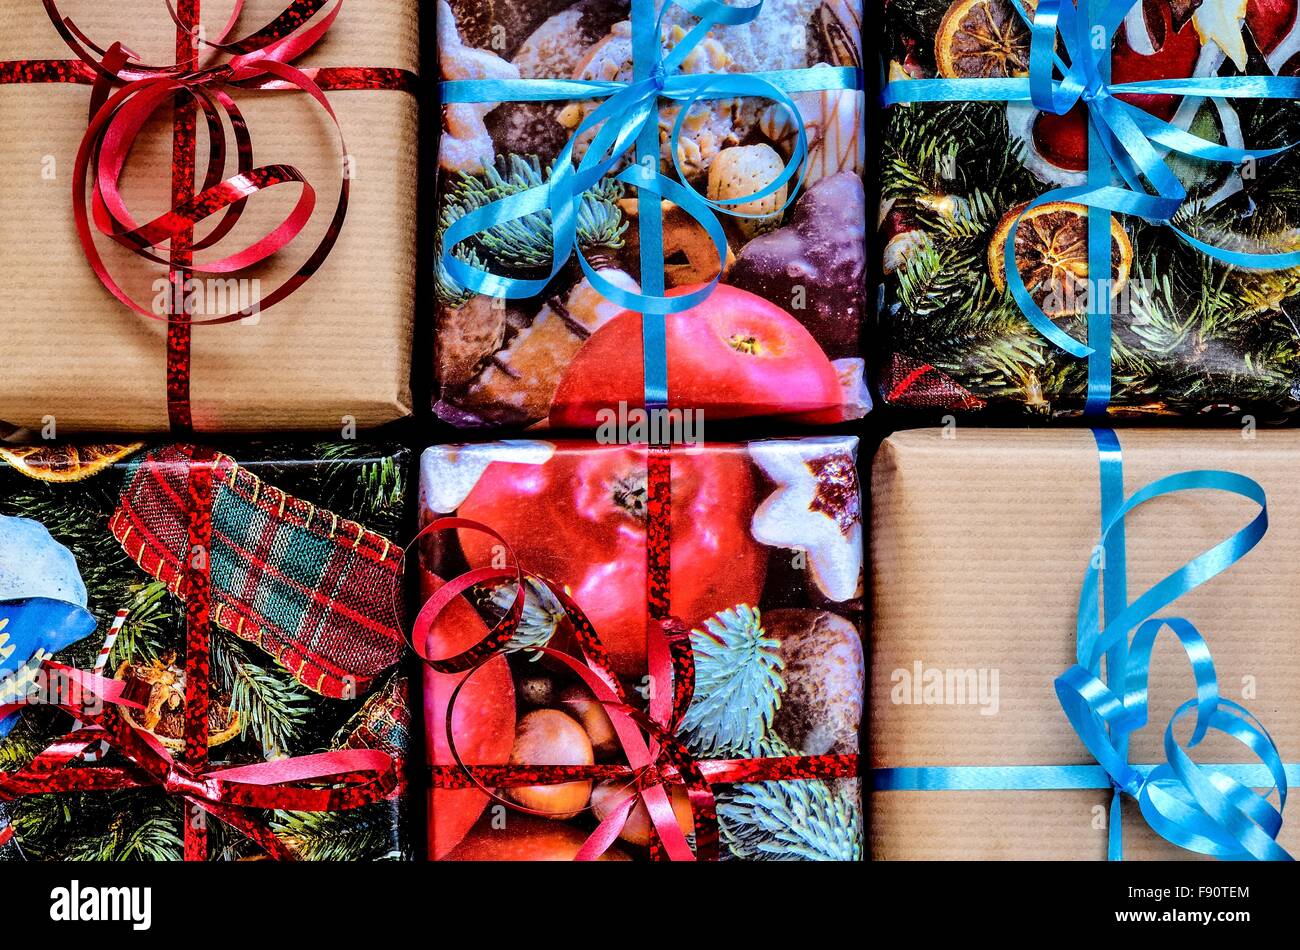 Christmas background with gifts. Gifts in decorative paper and ribbons. Stock Photo